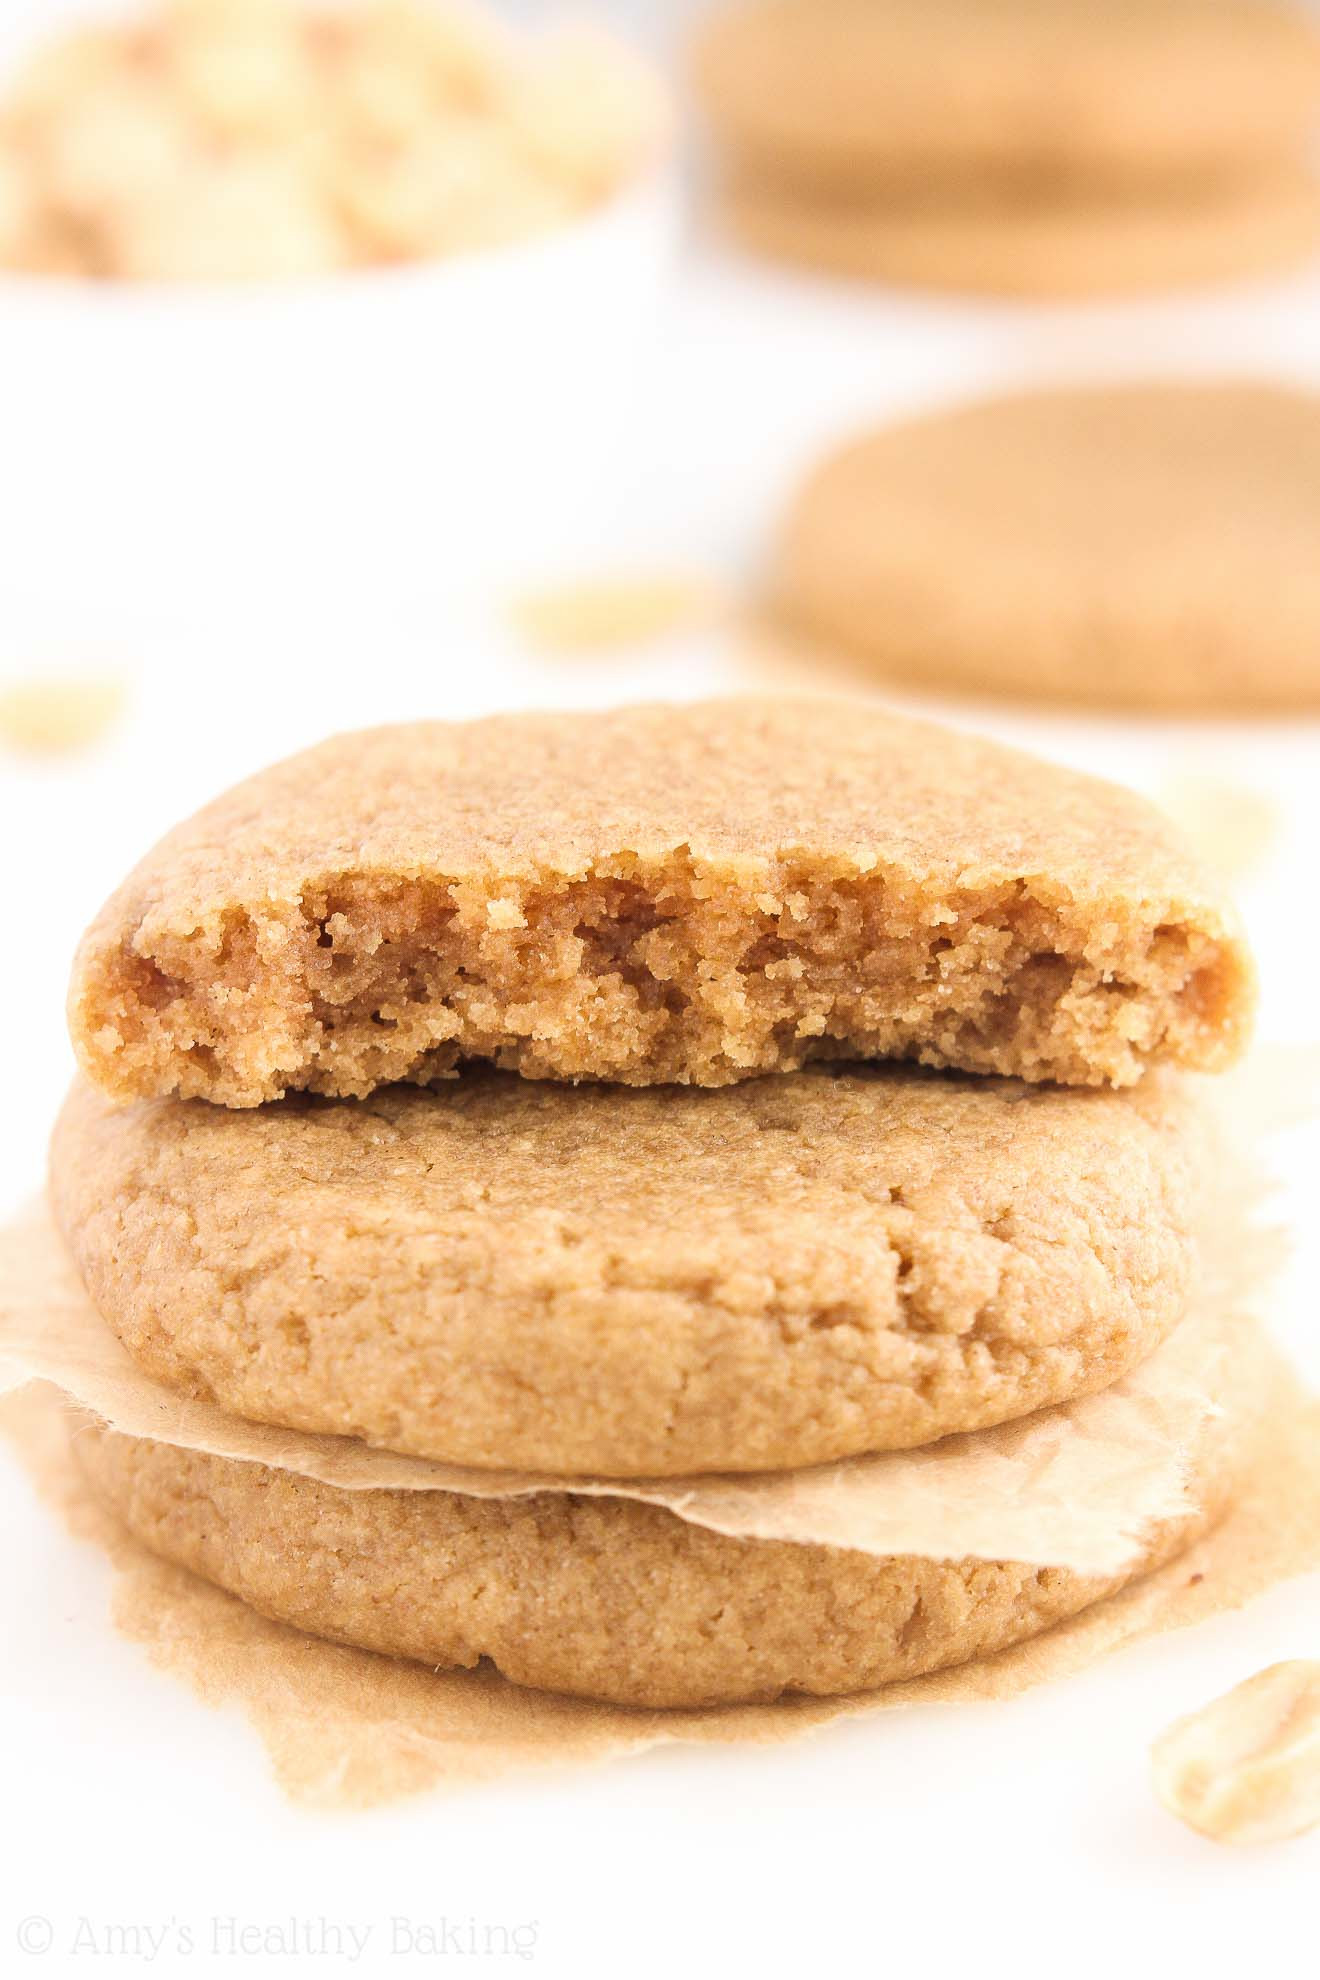 Peanut Butter Cookies Allrecipes
 The Ultimate Healthy Peanut Butter Cookies Recipe Video